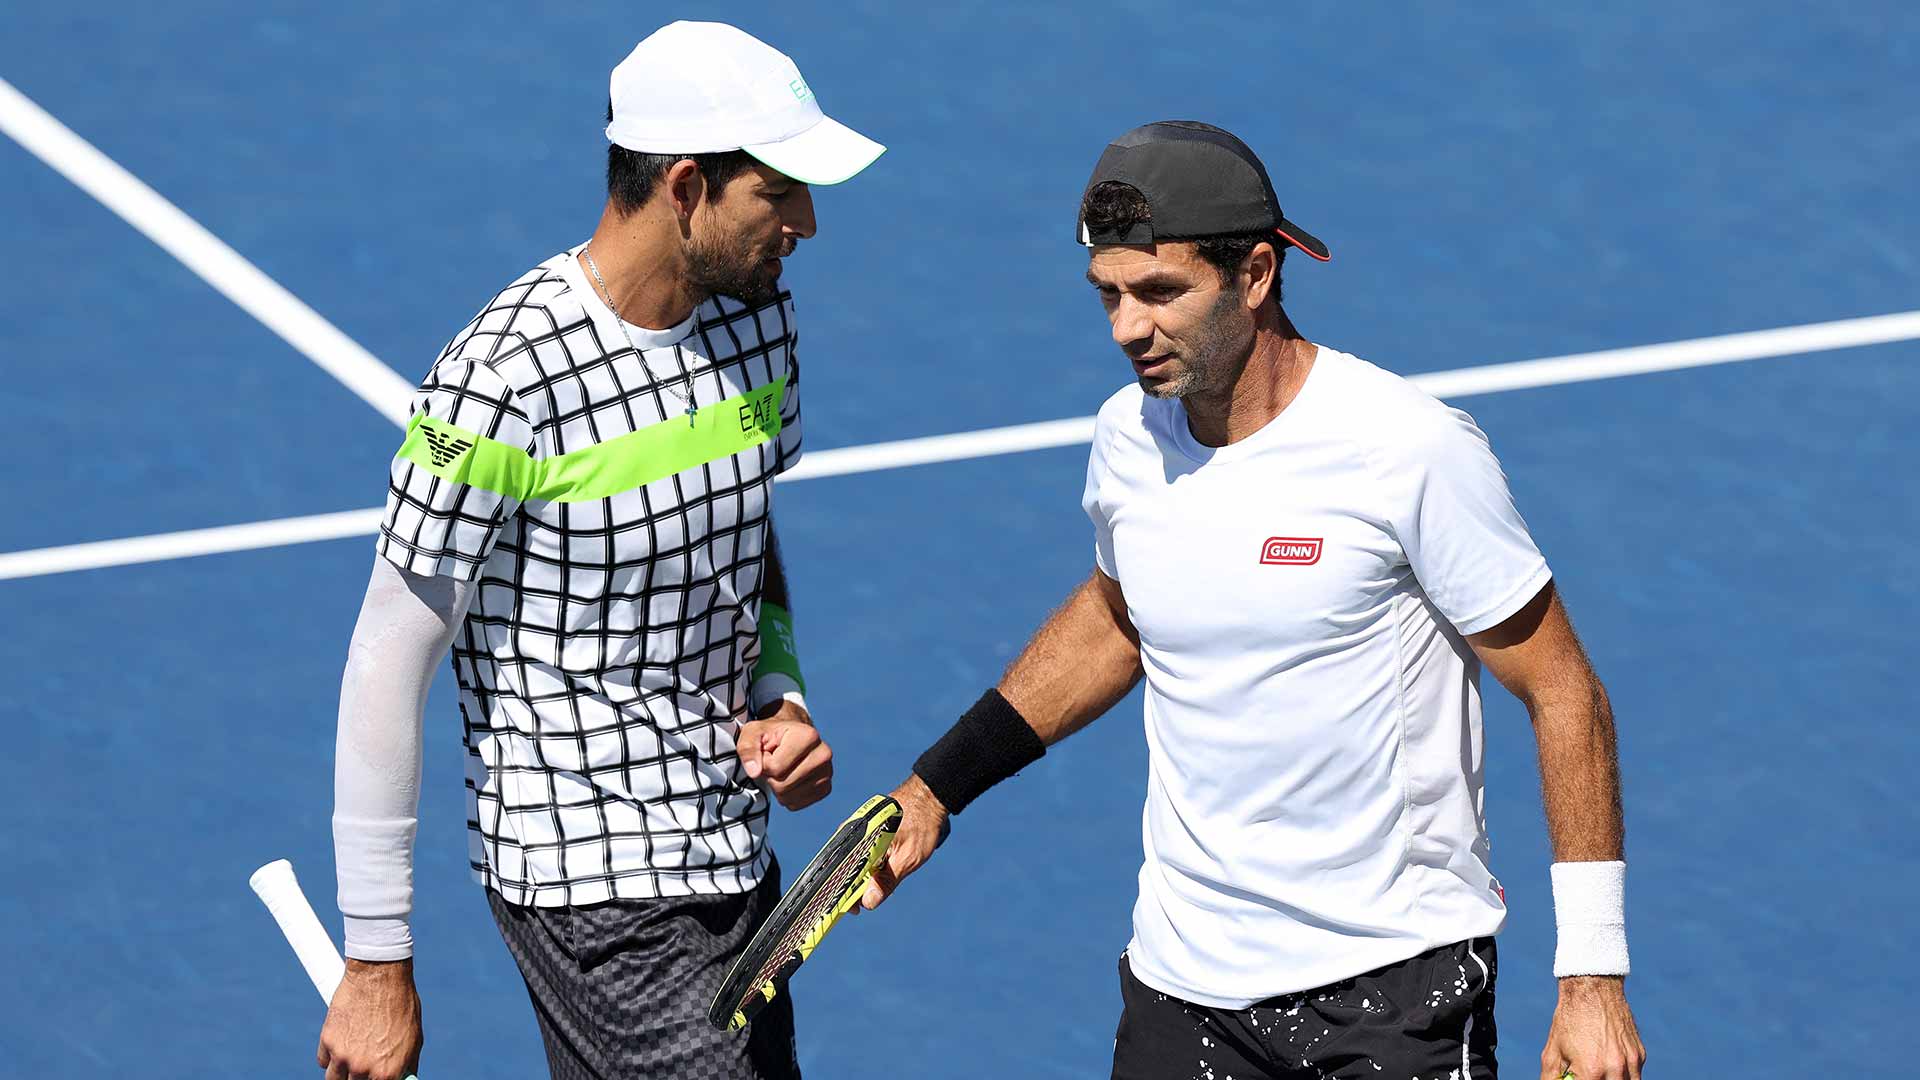 Marcelo Arevalo and Jean-Julien Rojer Seal Third Round Berth At US Open ATP Tour Tennis